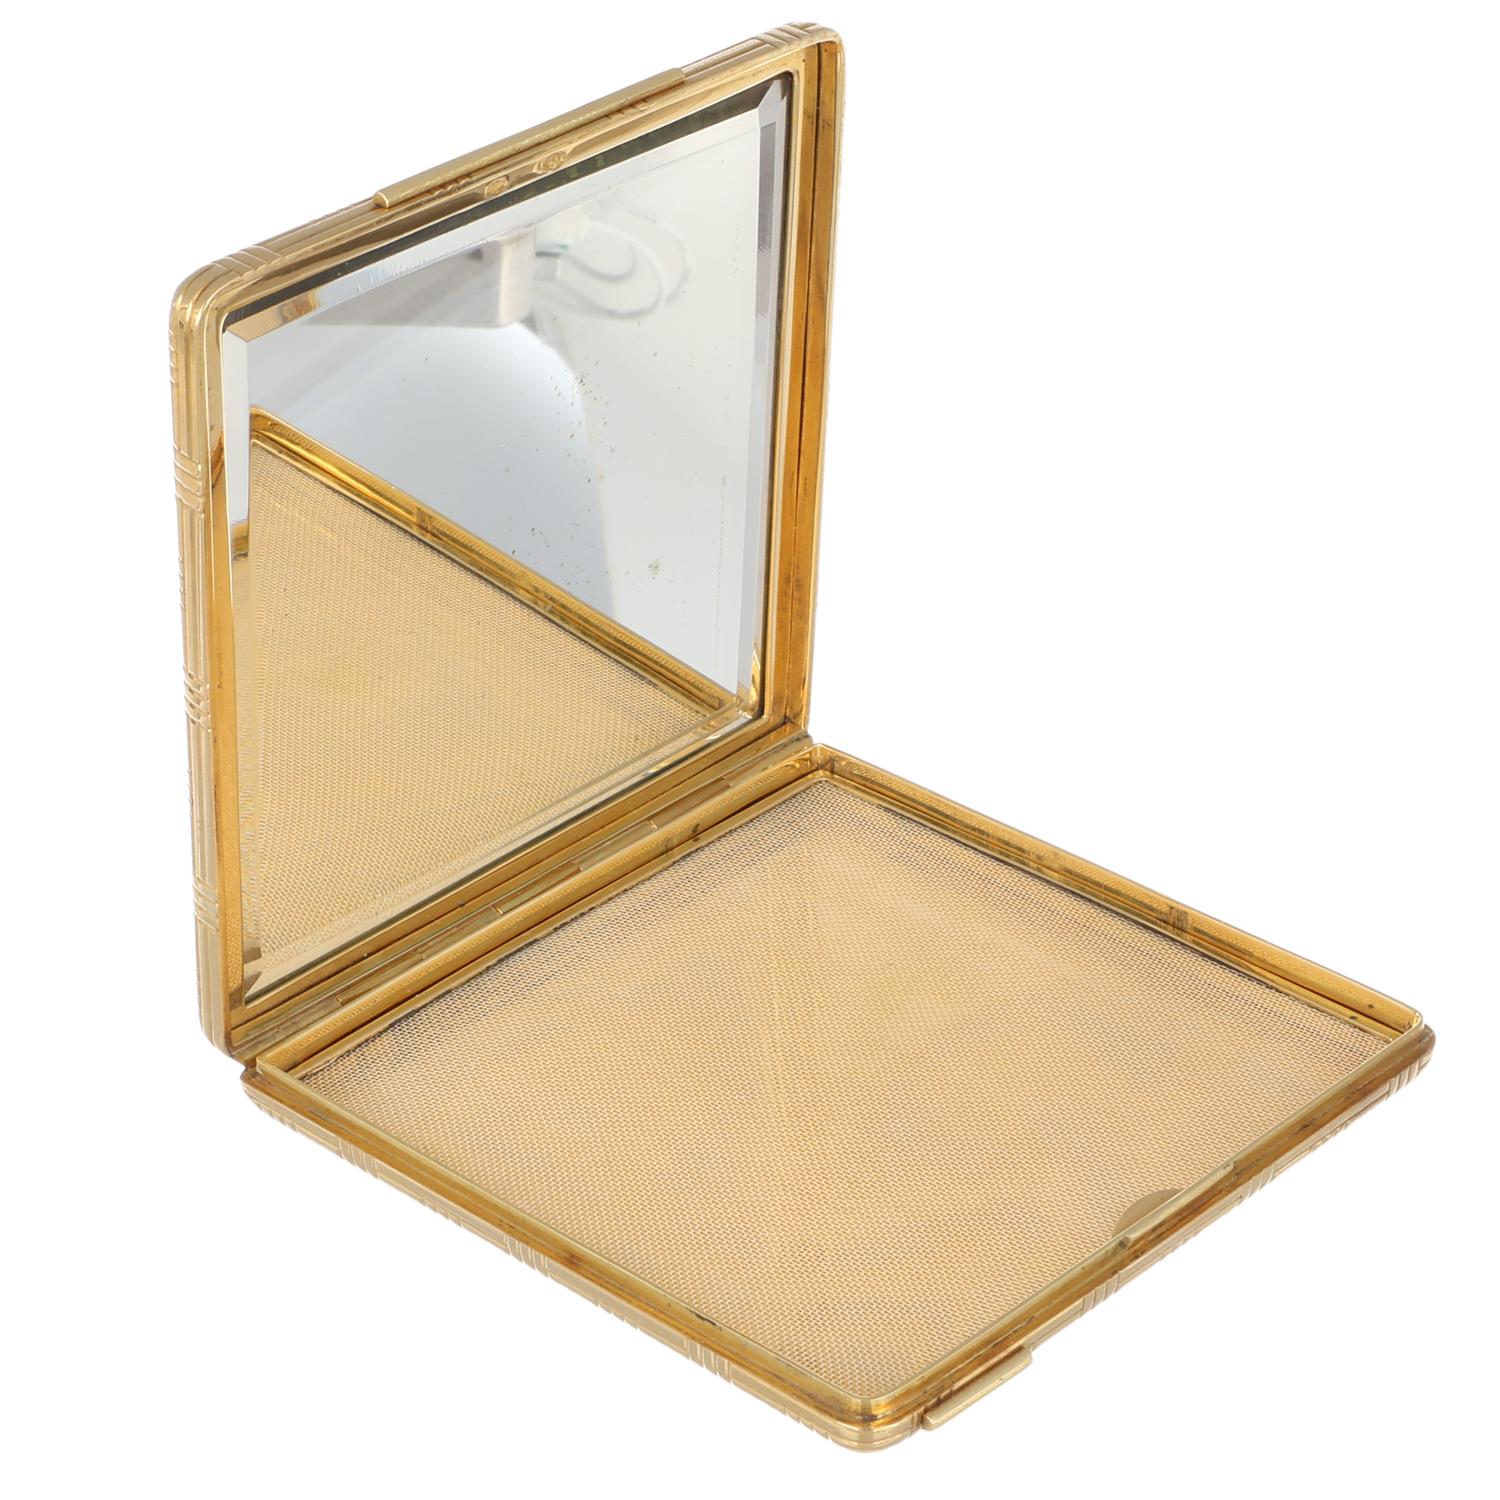 18Kt Gold Rare Compact Powder Box - Made in Italy 1970 circa - Geometric Pattern For Sale 2